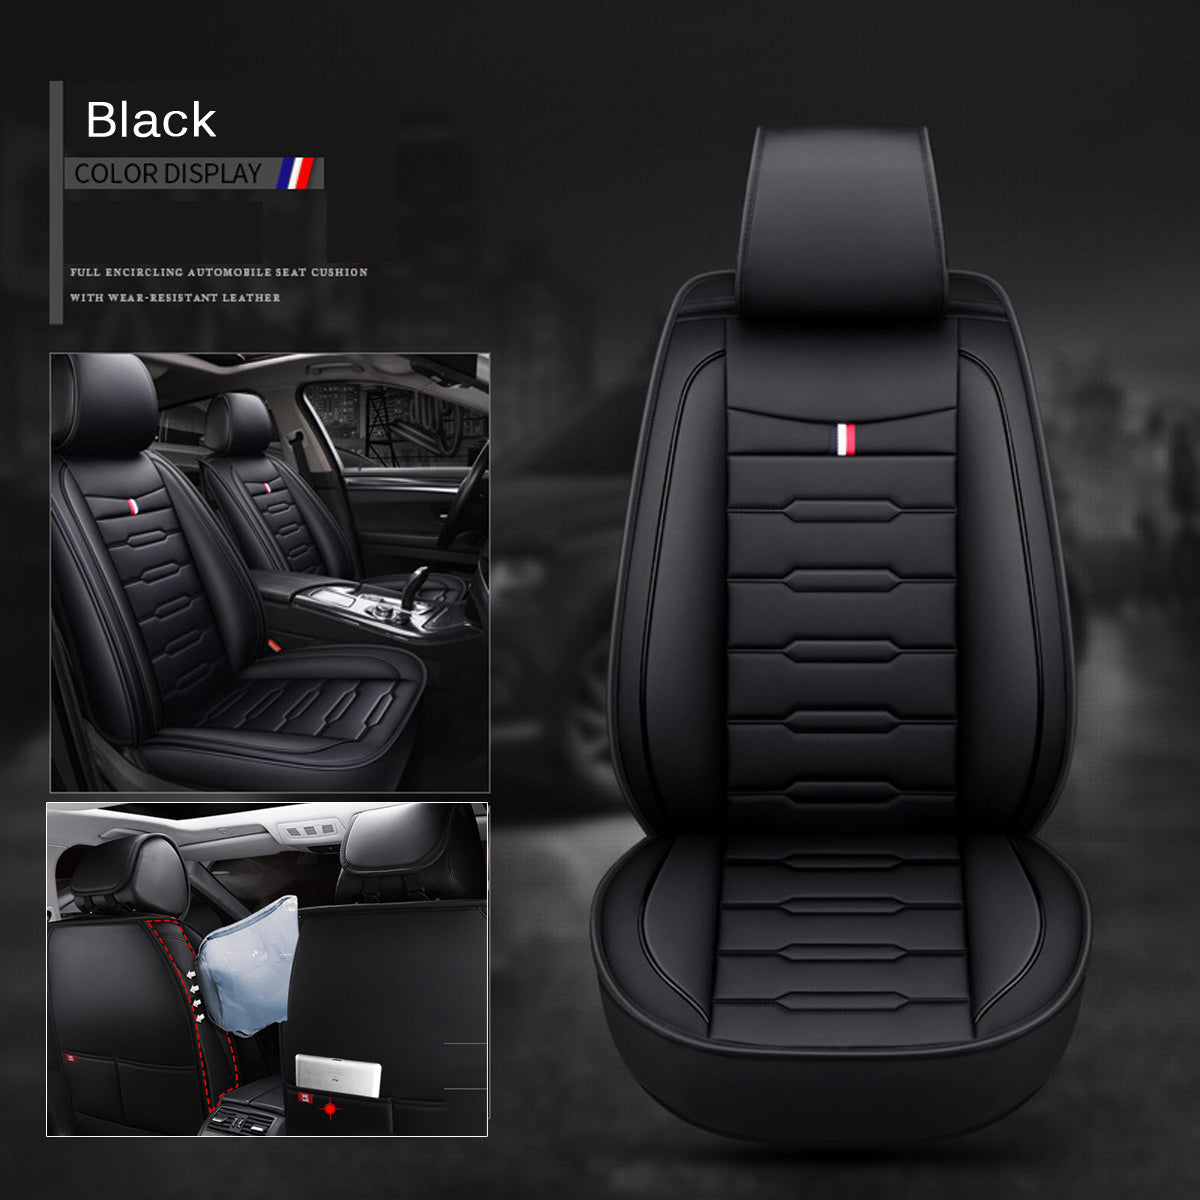 Universal Car Seat Cover PU Leather Front Rear Cushion Accessories Seat Protect - Auto GoShop